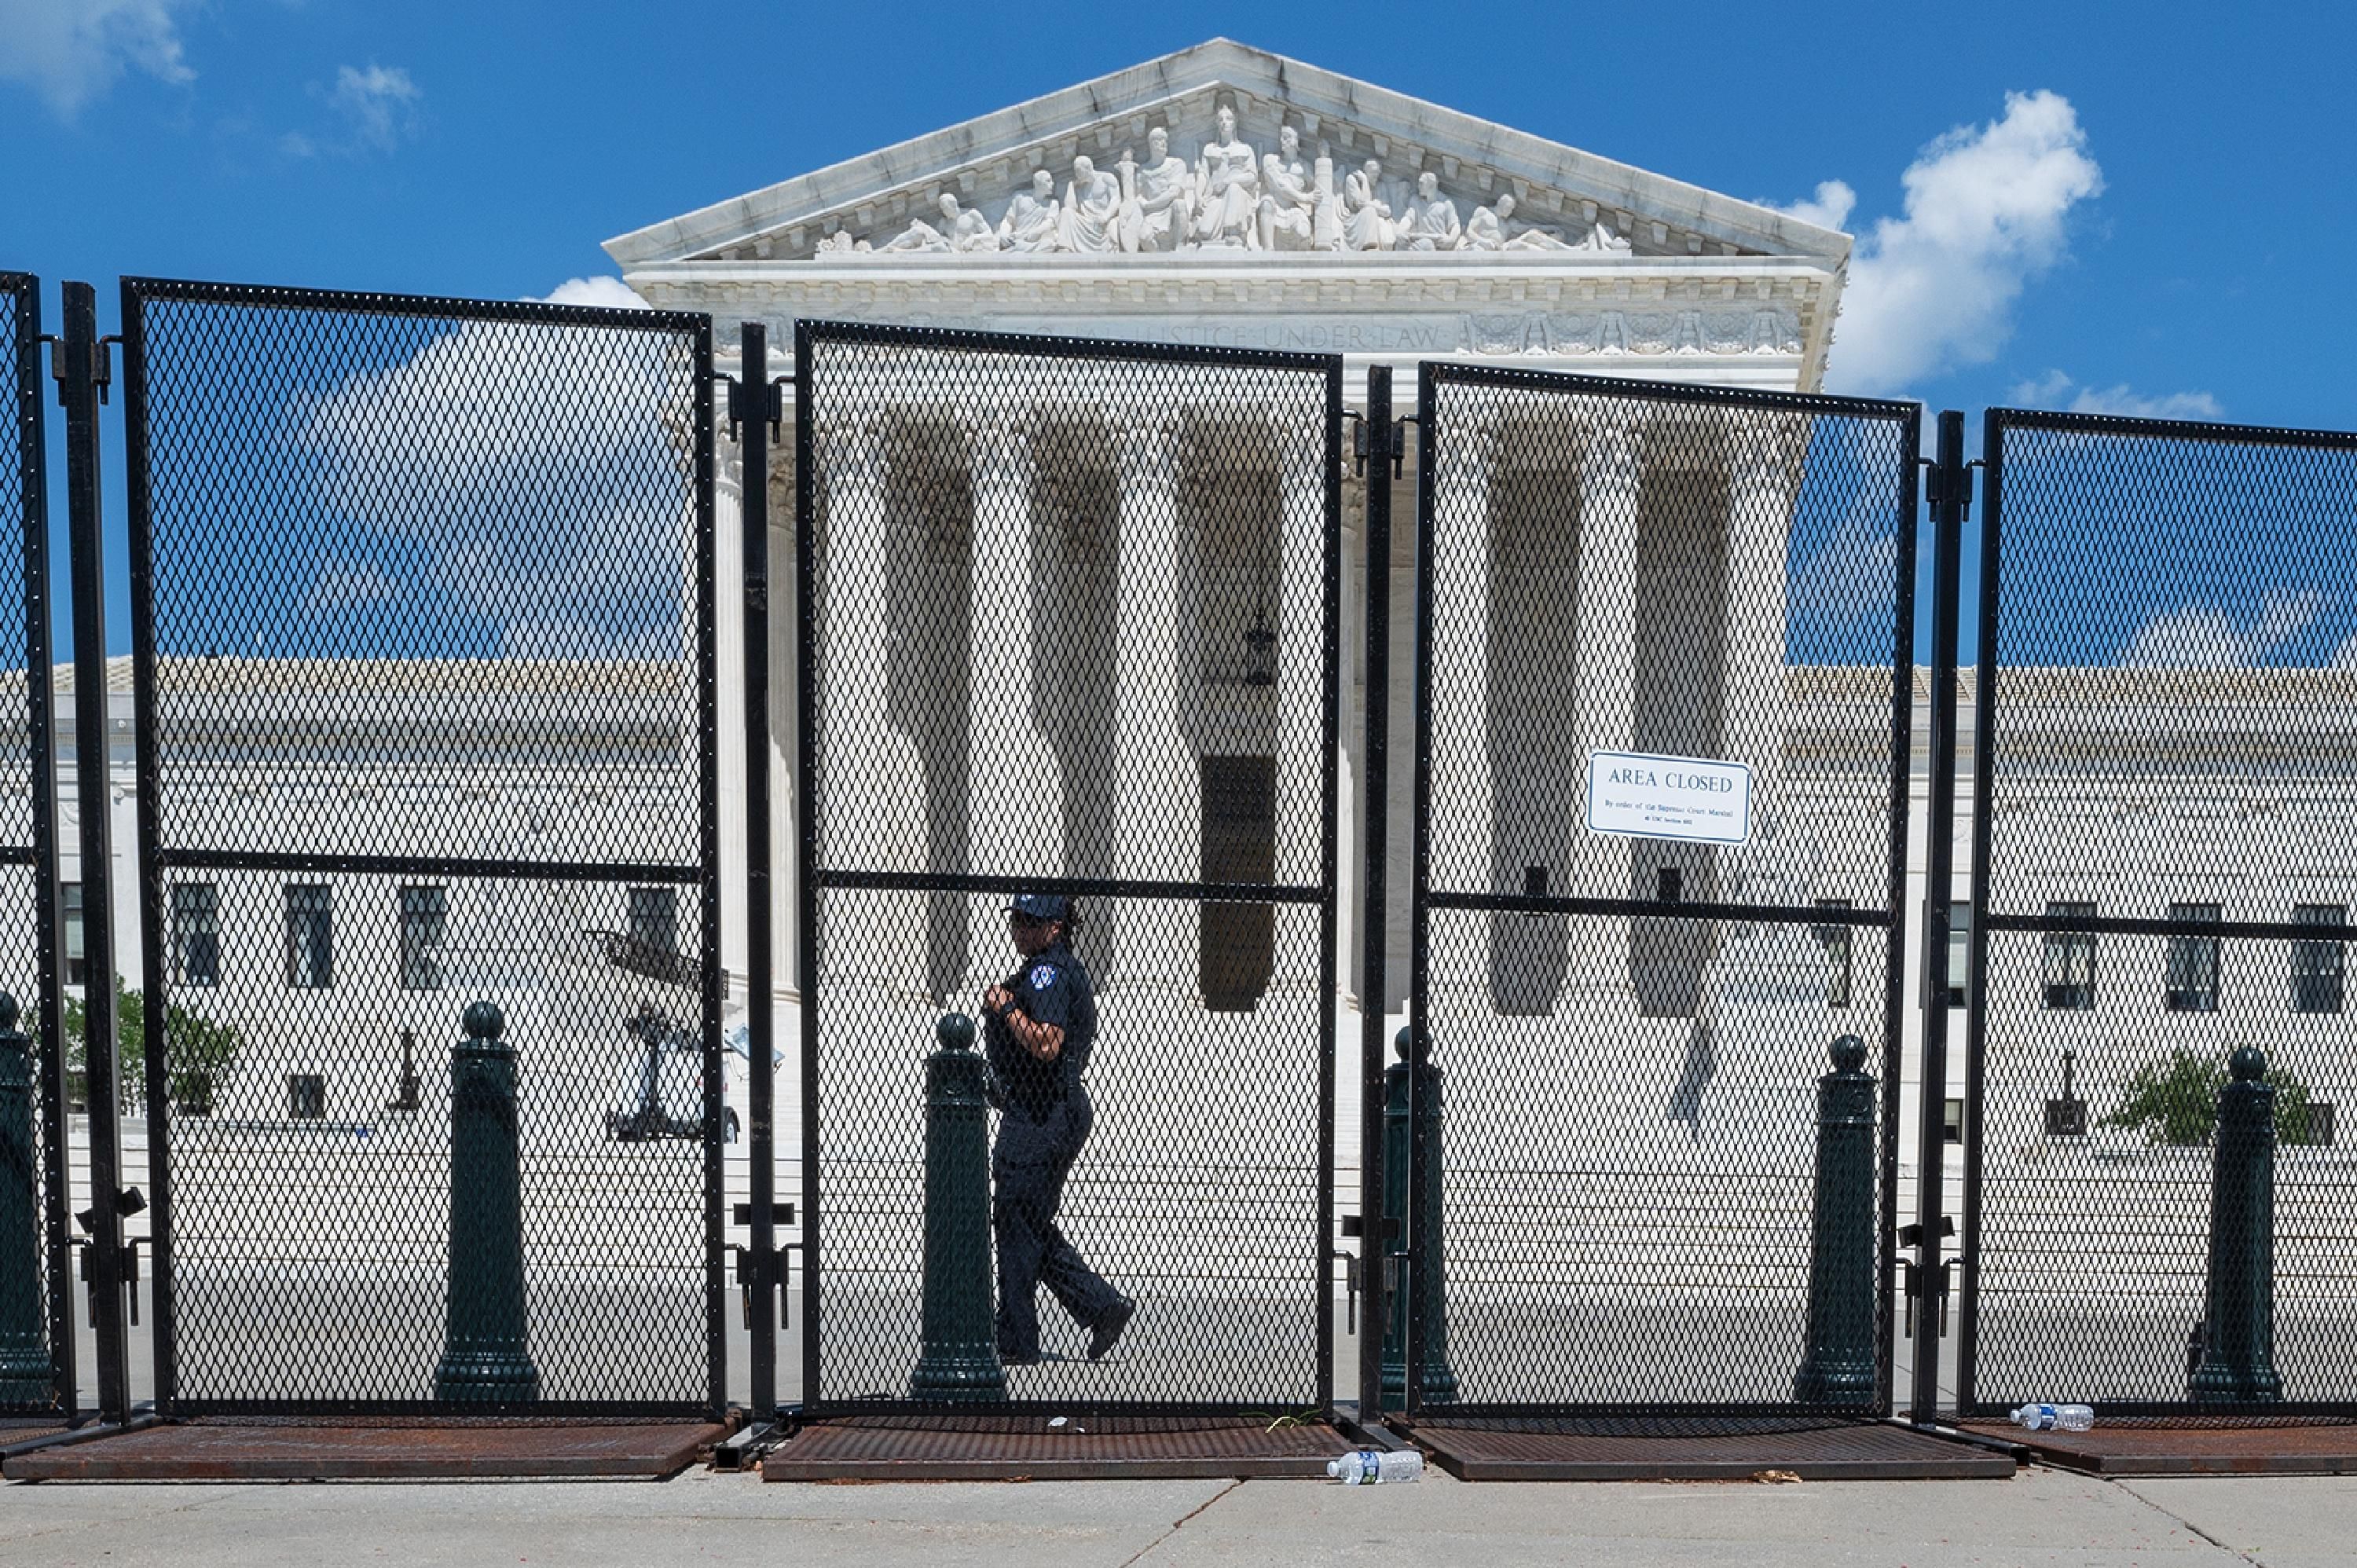 A fence blocks the entrance to the U.S. Supreme Court